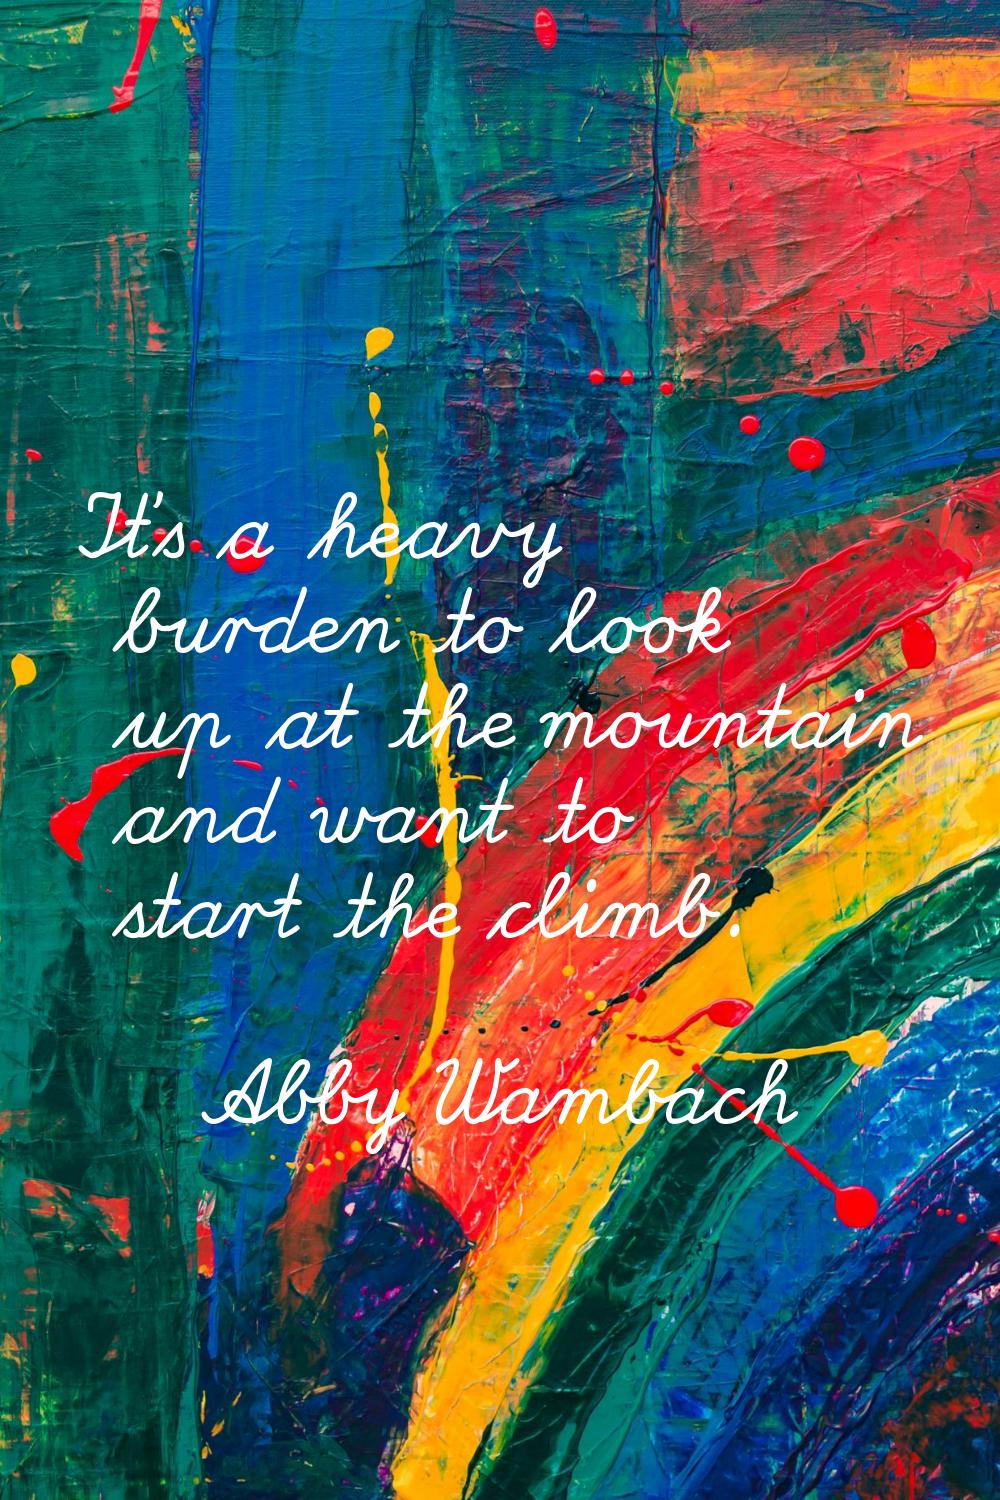 It's a heavy burden to look up at the mountain and want to start the climb.